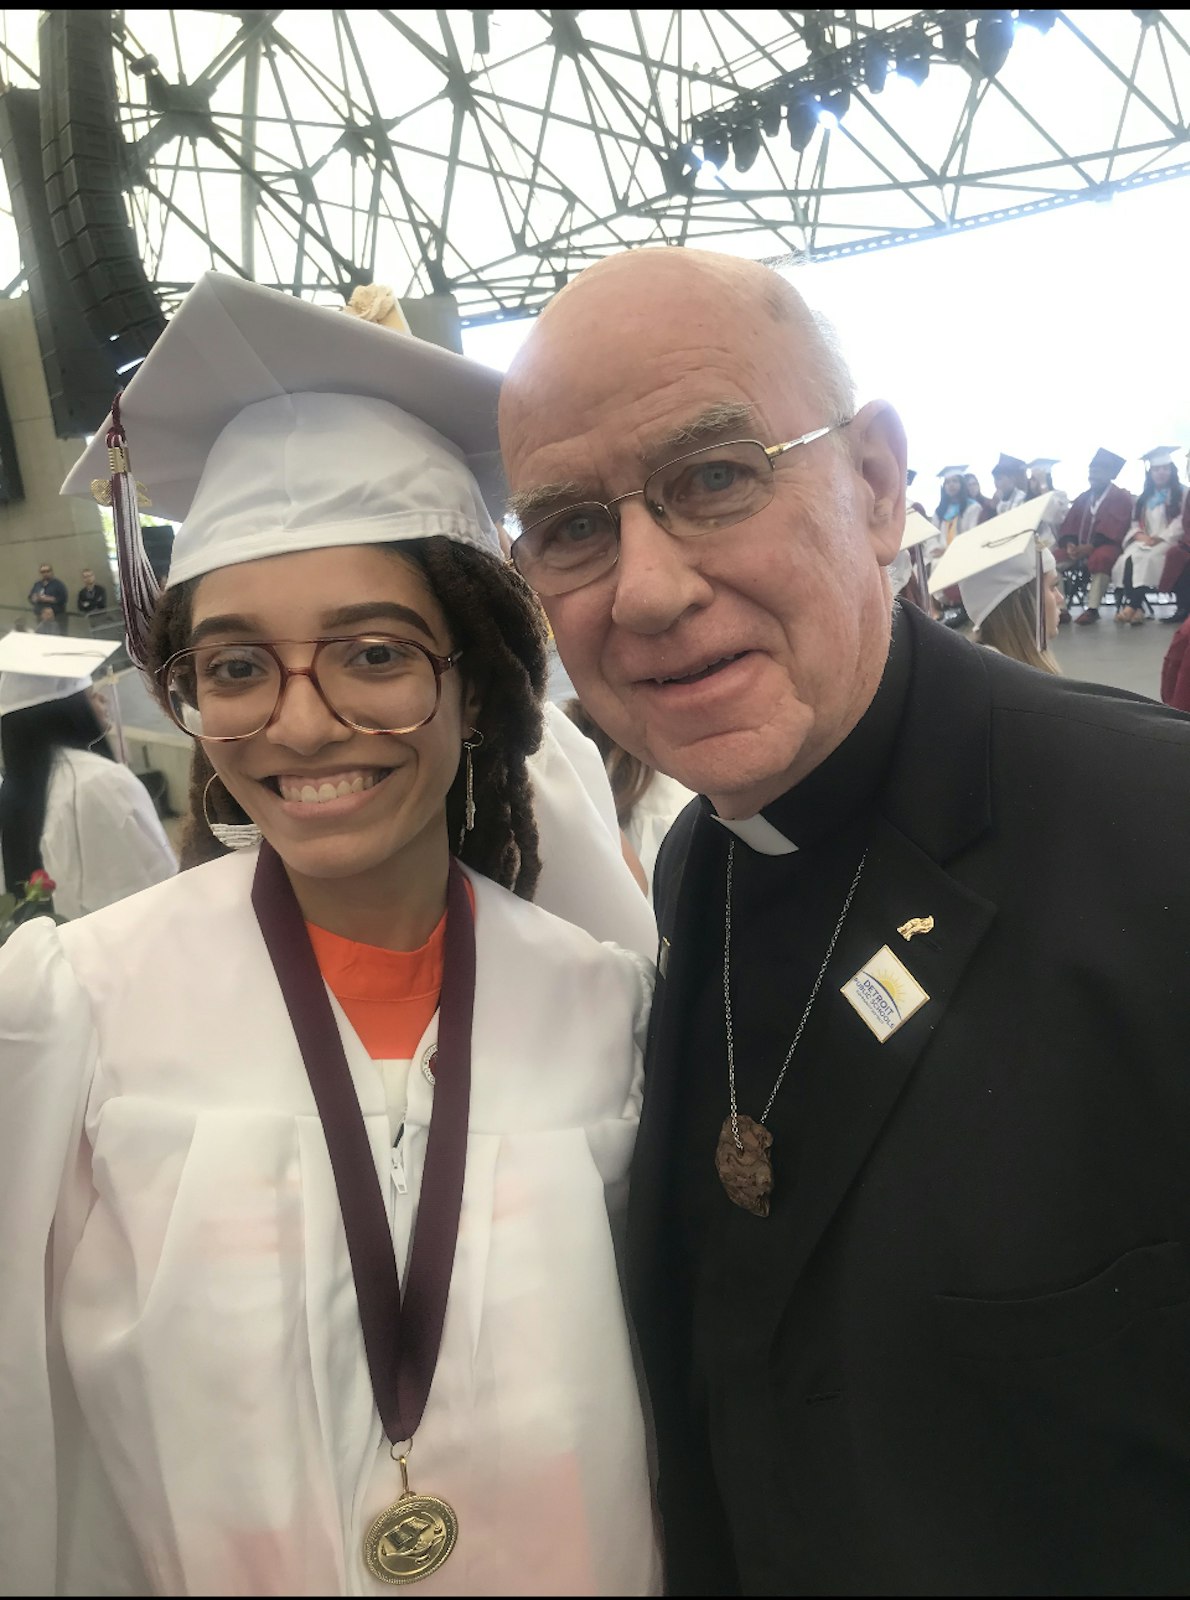 Fr. John Phelps, C.Ss.R., one of the co-founders of Life Directions, poses with a young person who found success through Life Directions and graduated high school. (Photo courtesy of Life Directions)